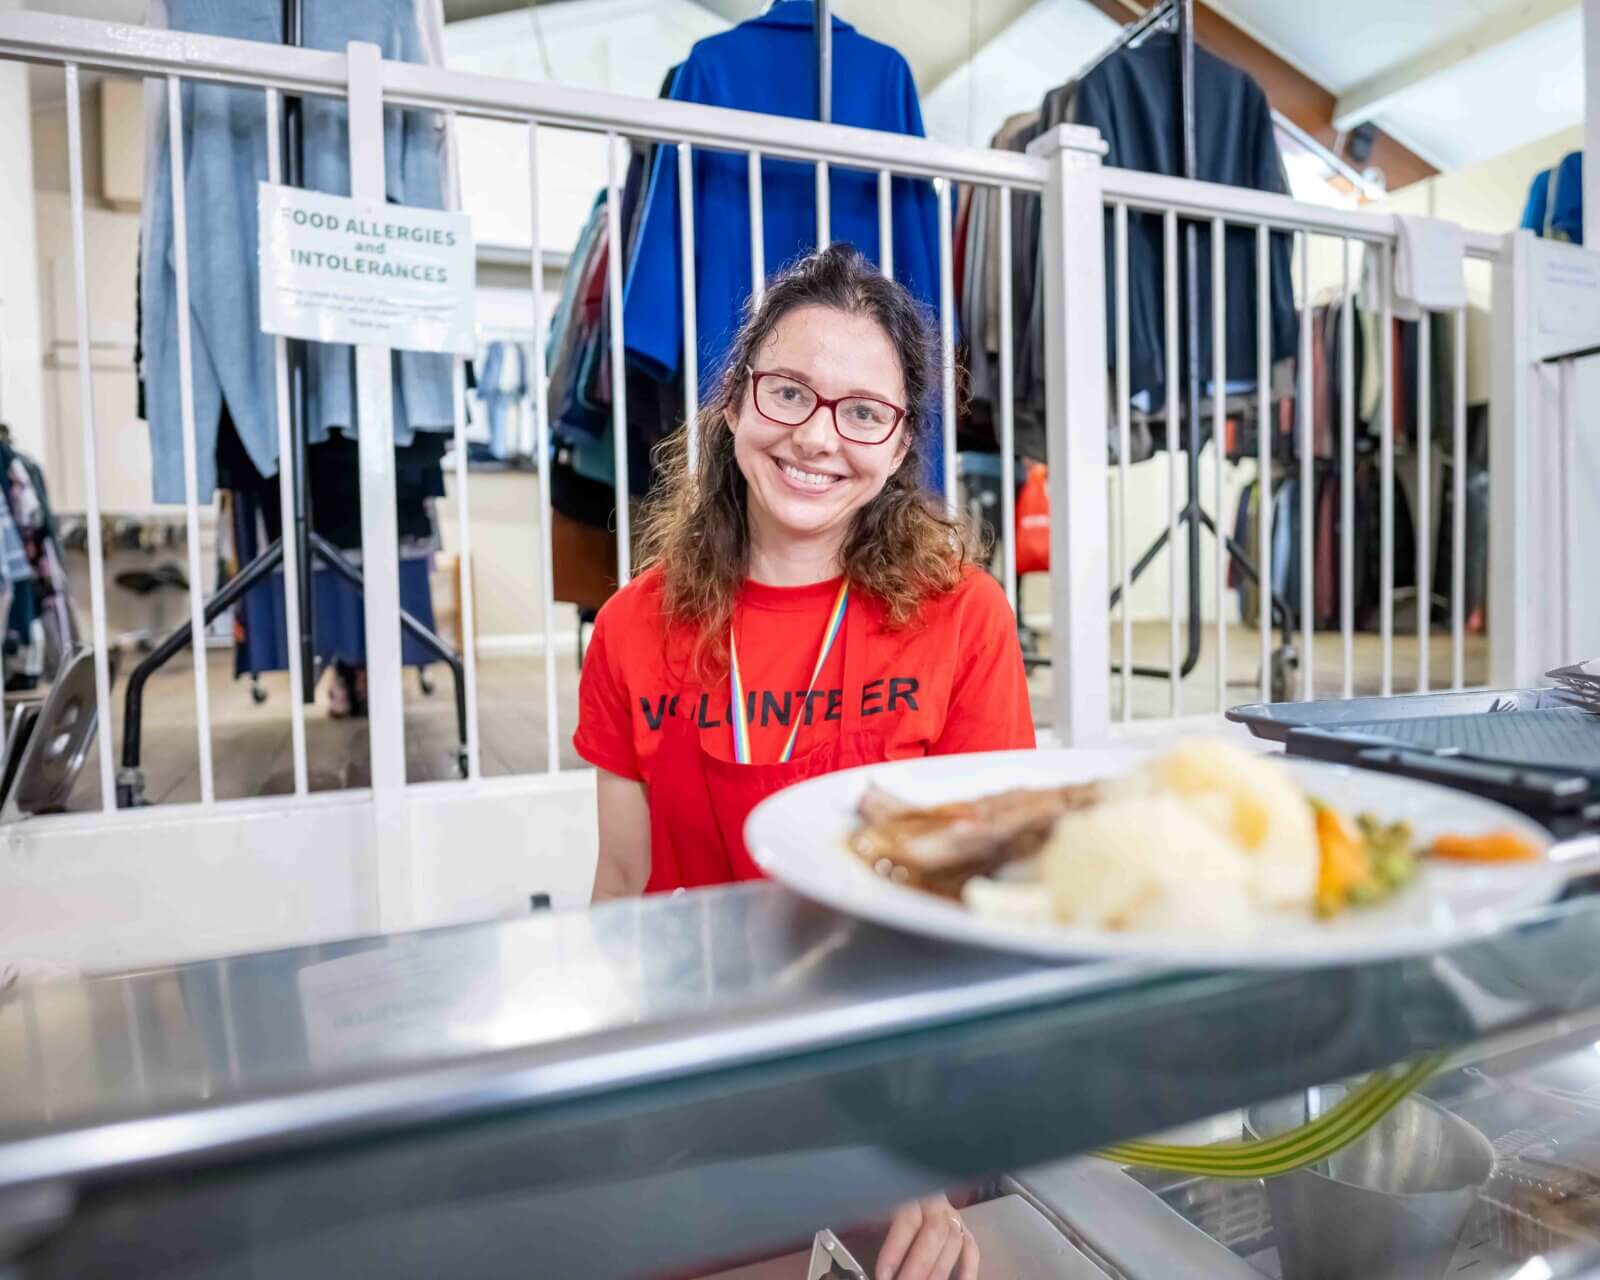 Lady in red tshirt which says volunteer on the front in black writing is smiling at camera. She is standing behind a silver food service counter with a plate of food on top